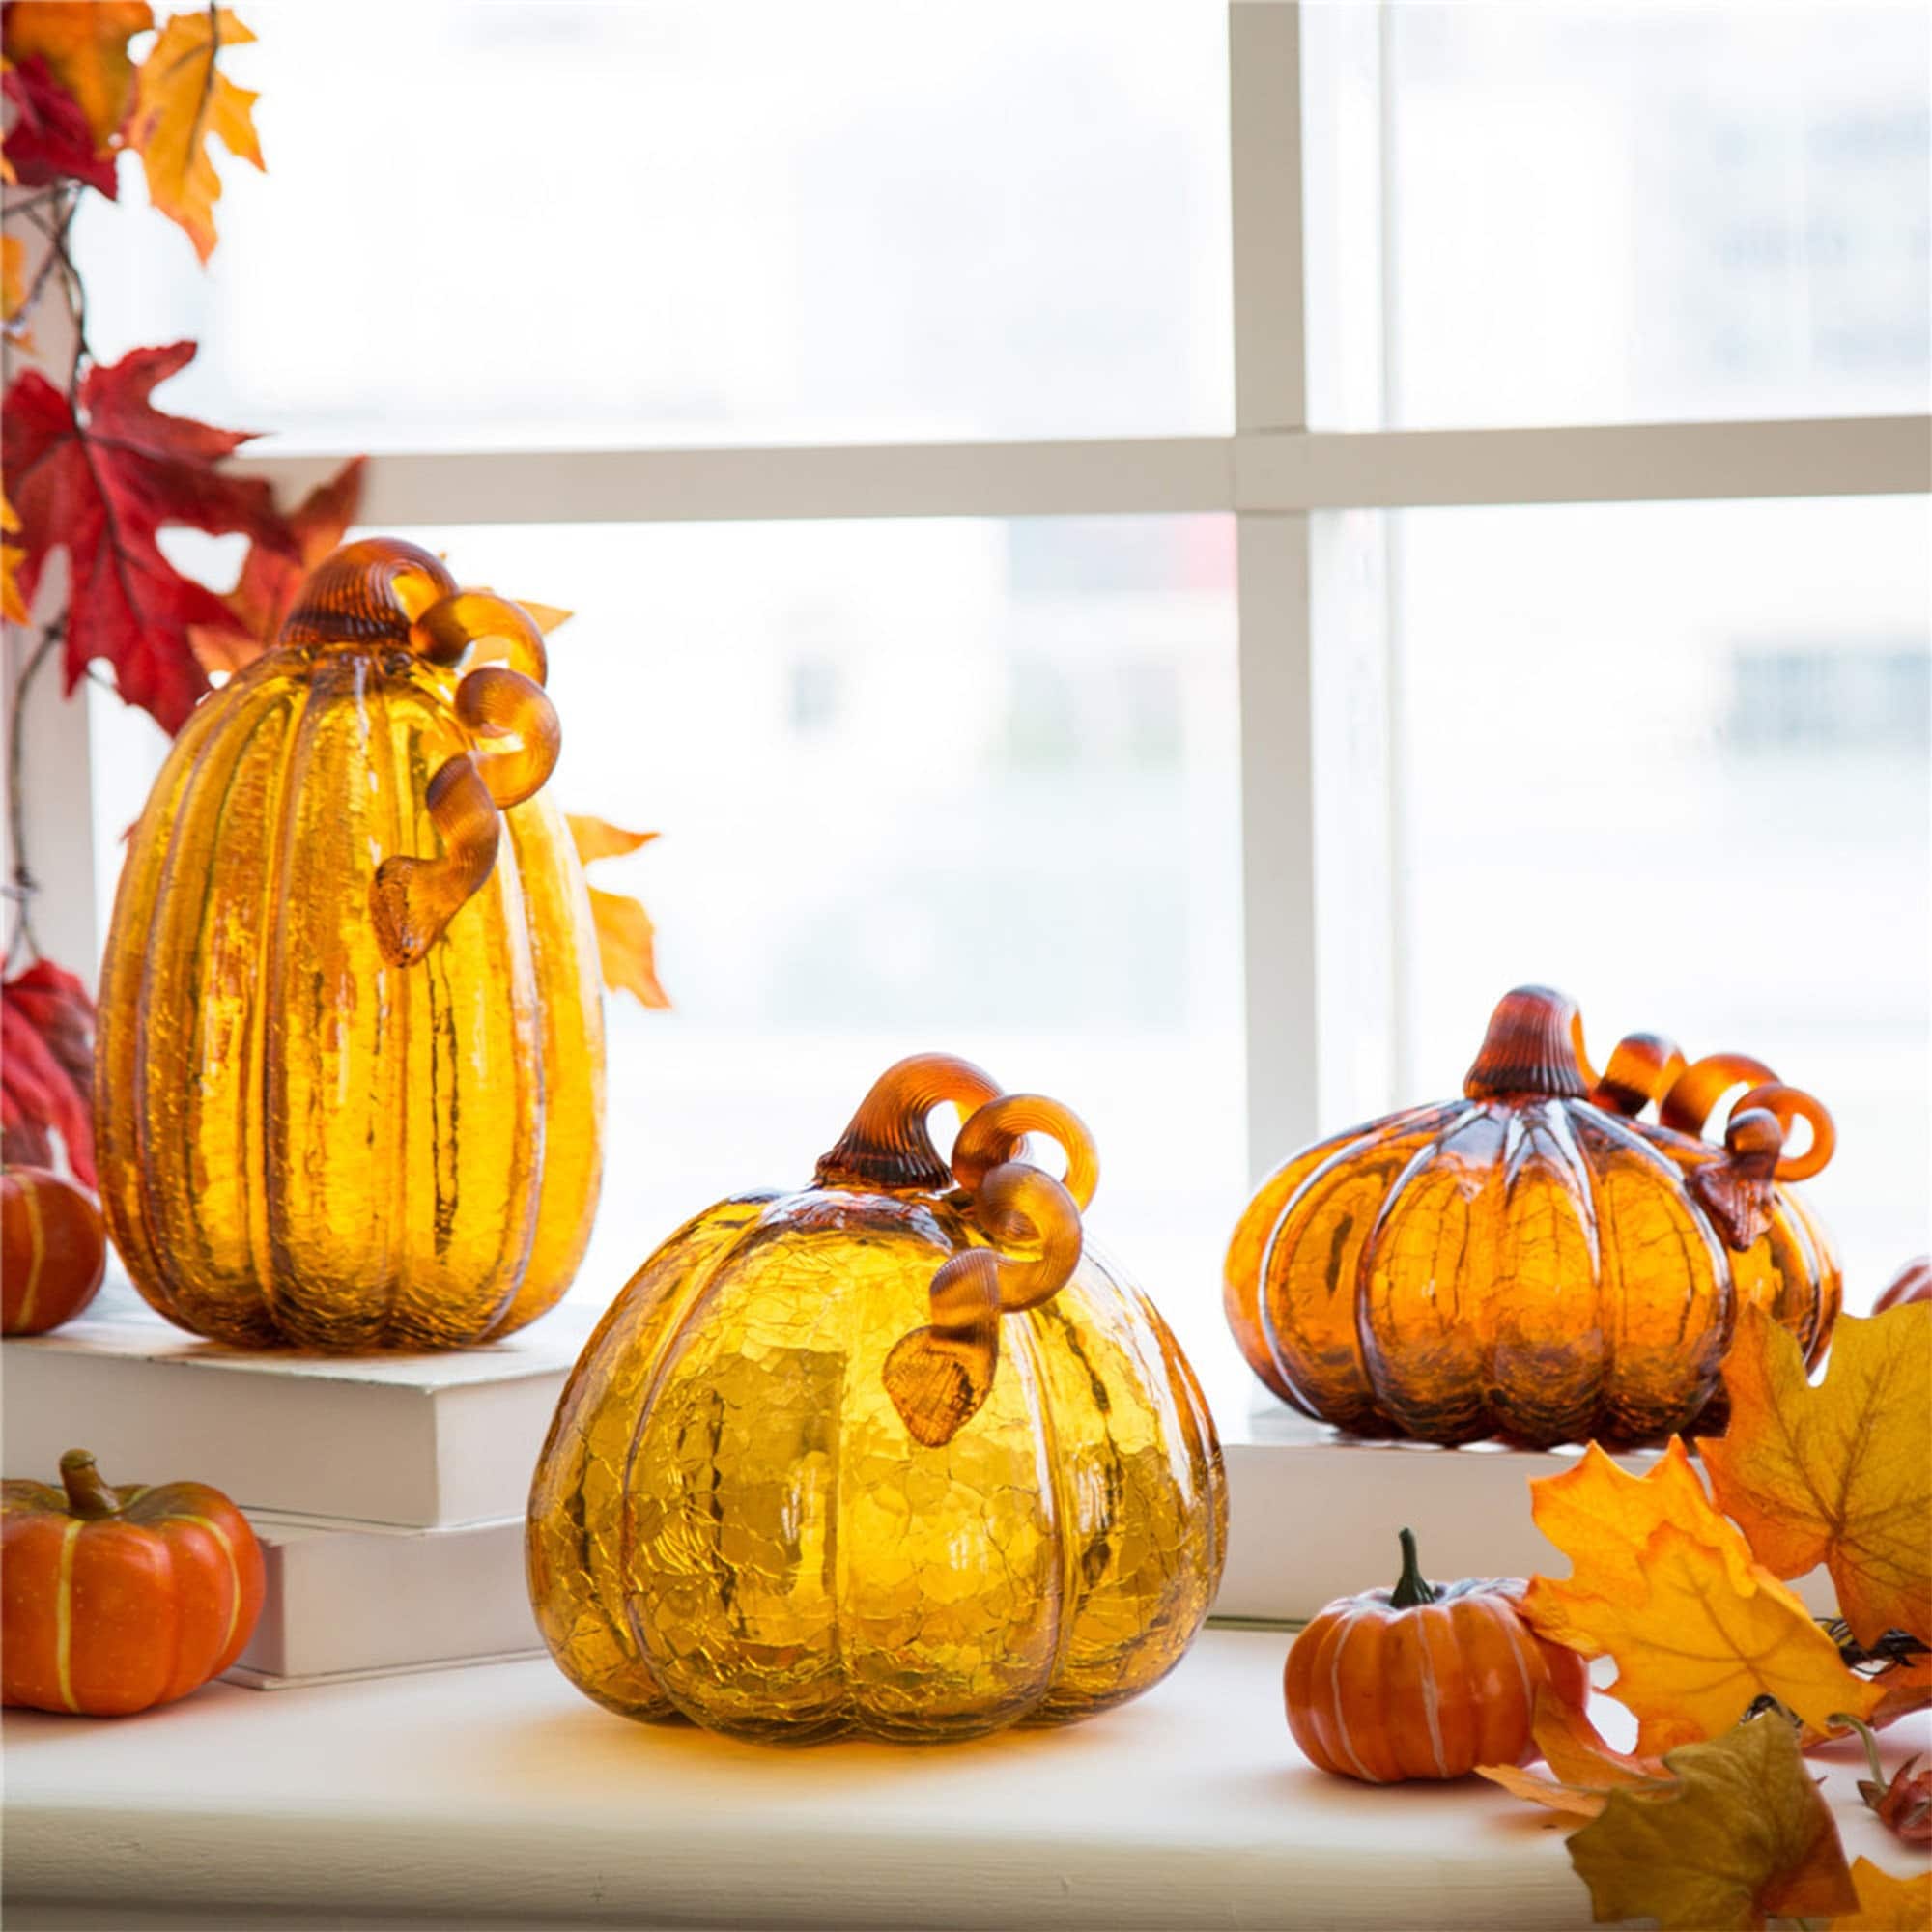 https://ak1.ostkcdn.com/images/products/is/images/direct/53c1930e97ad3aa354ae434b4f01d45c204c2afd/Glitzhome-Amber-Crackle-Handblown-Fall-Glass-Pumpkins-for-Thanksgiving-Decor.jpg